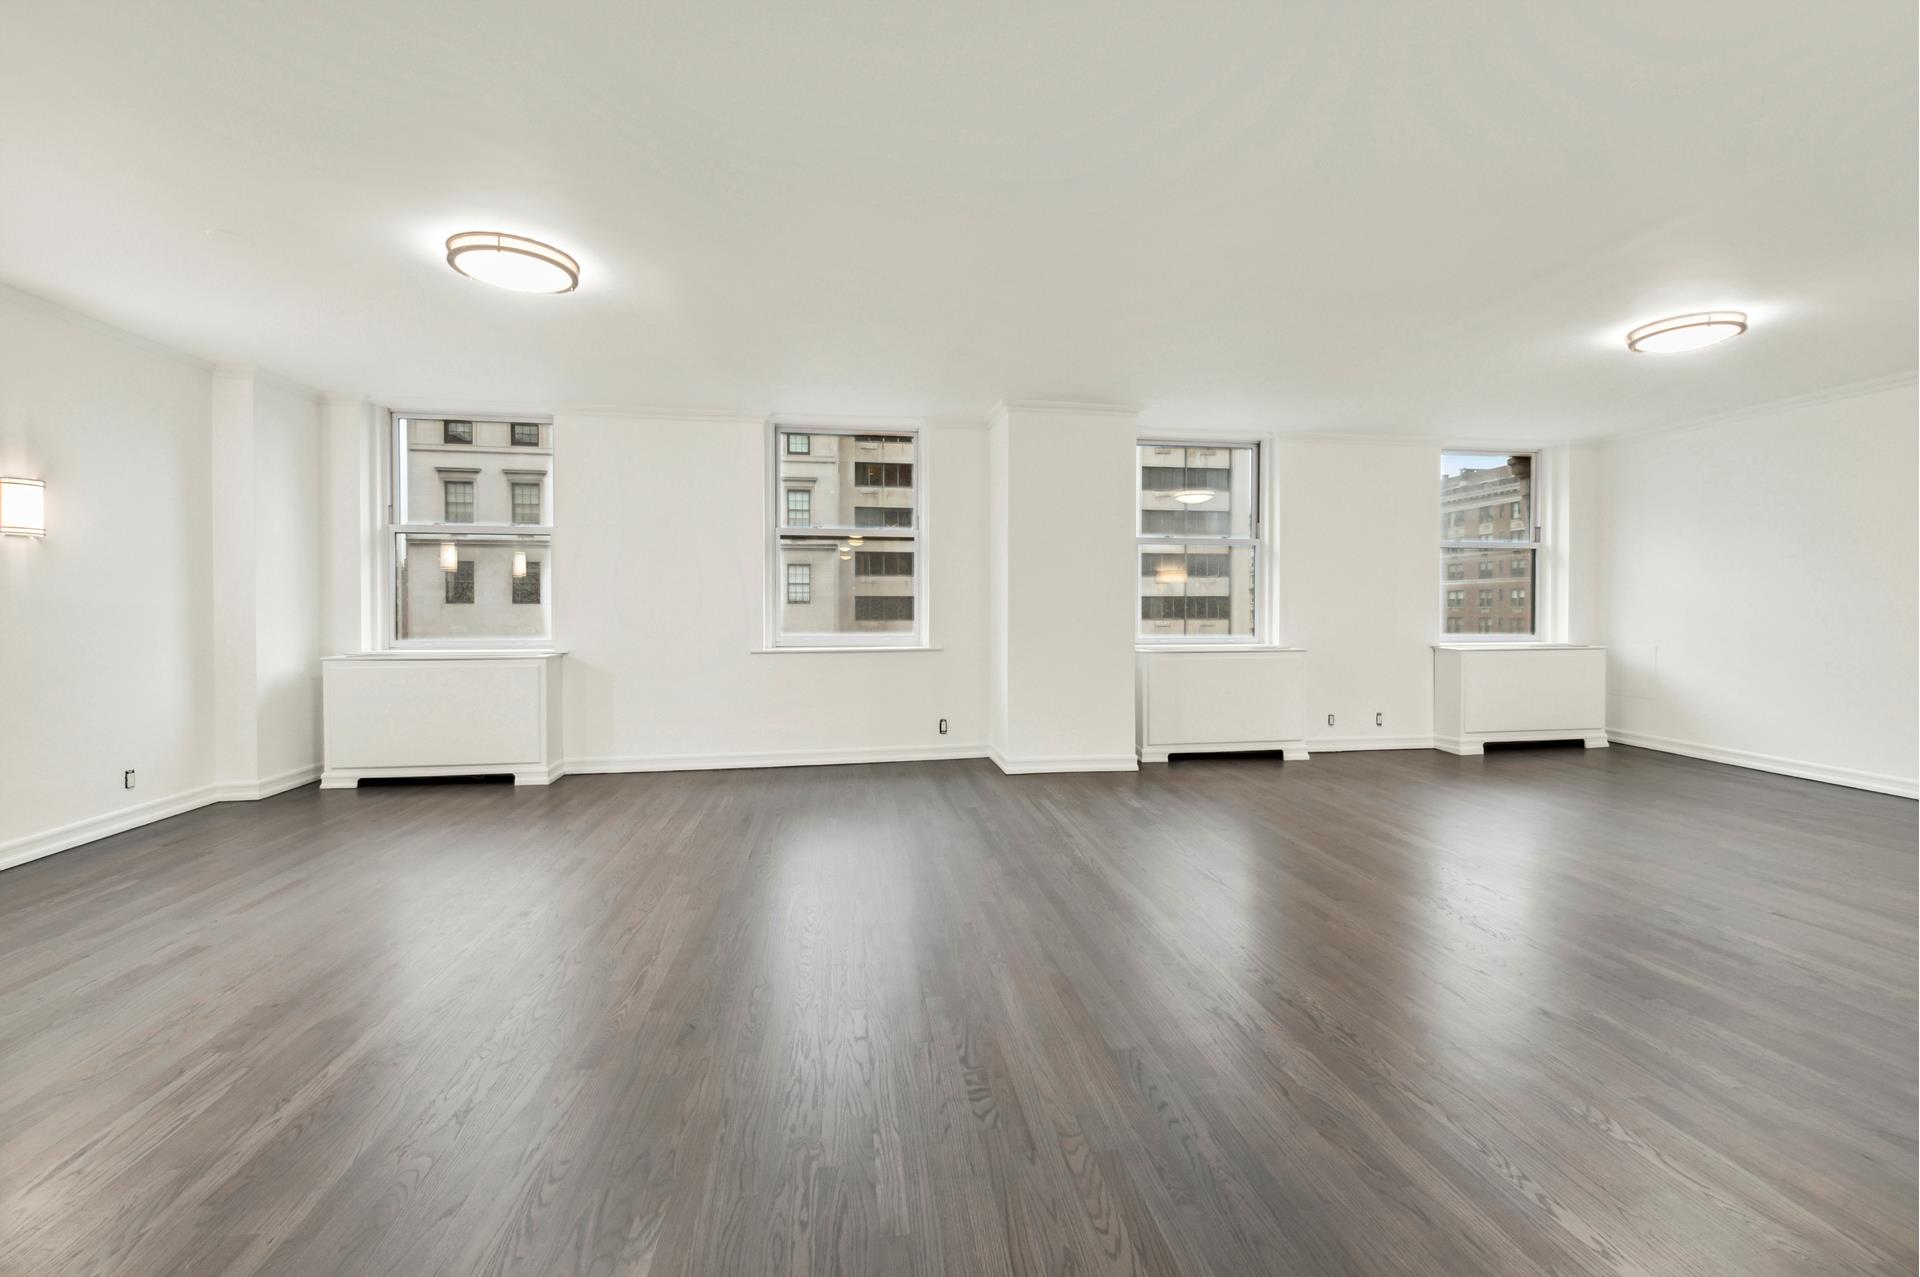 74 East 79th Street 13, Lenox Hill, Upper East Side, NYC - 4 Bedrooms  
3.5 Bathrooms  
7 Rooms - 